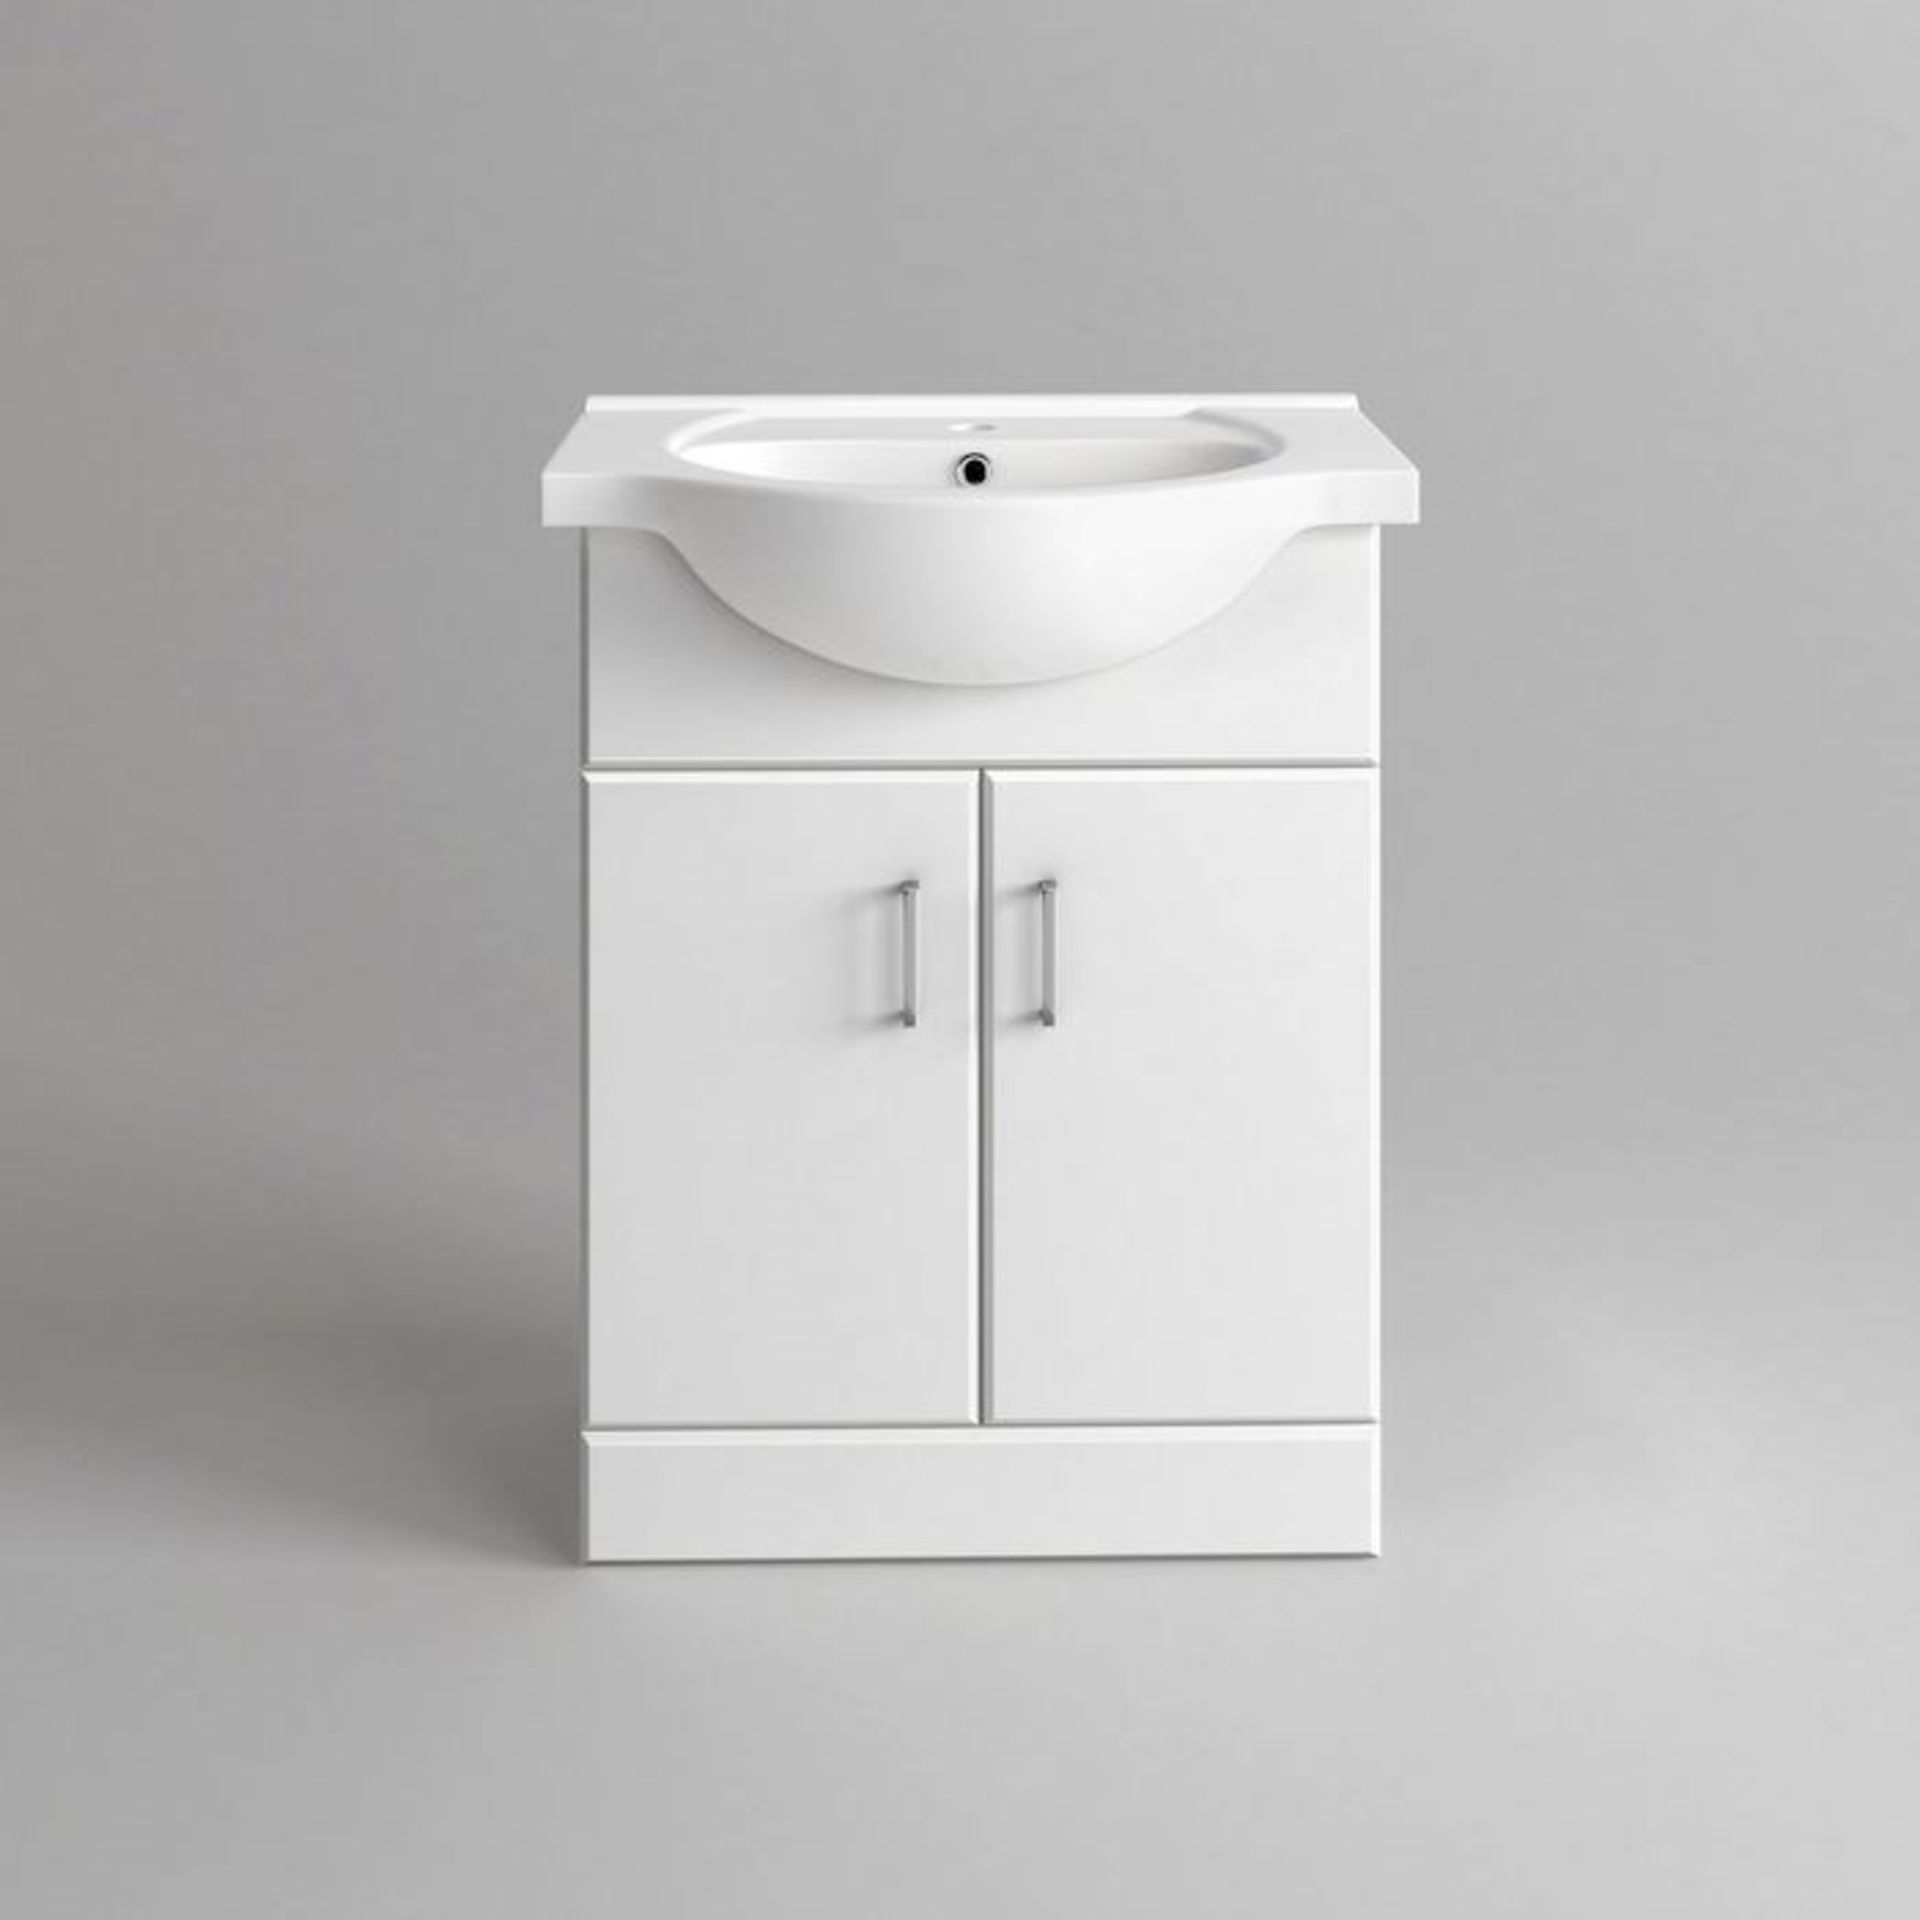 (PM28) 550x300mm Quartz Gloss White Built In Sink Cabinet. RRP £349.99.Comes complete with ba... - Image 4 of 4